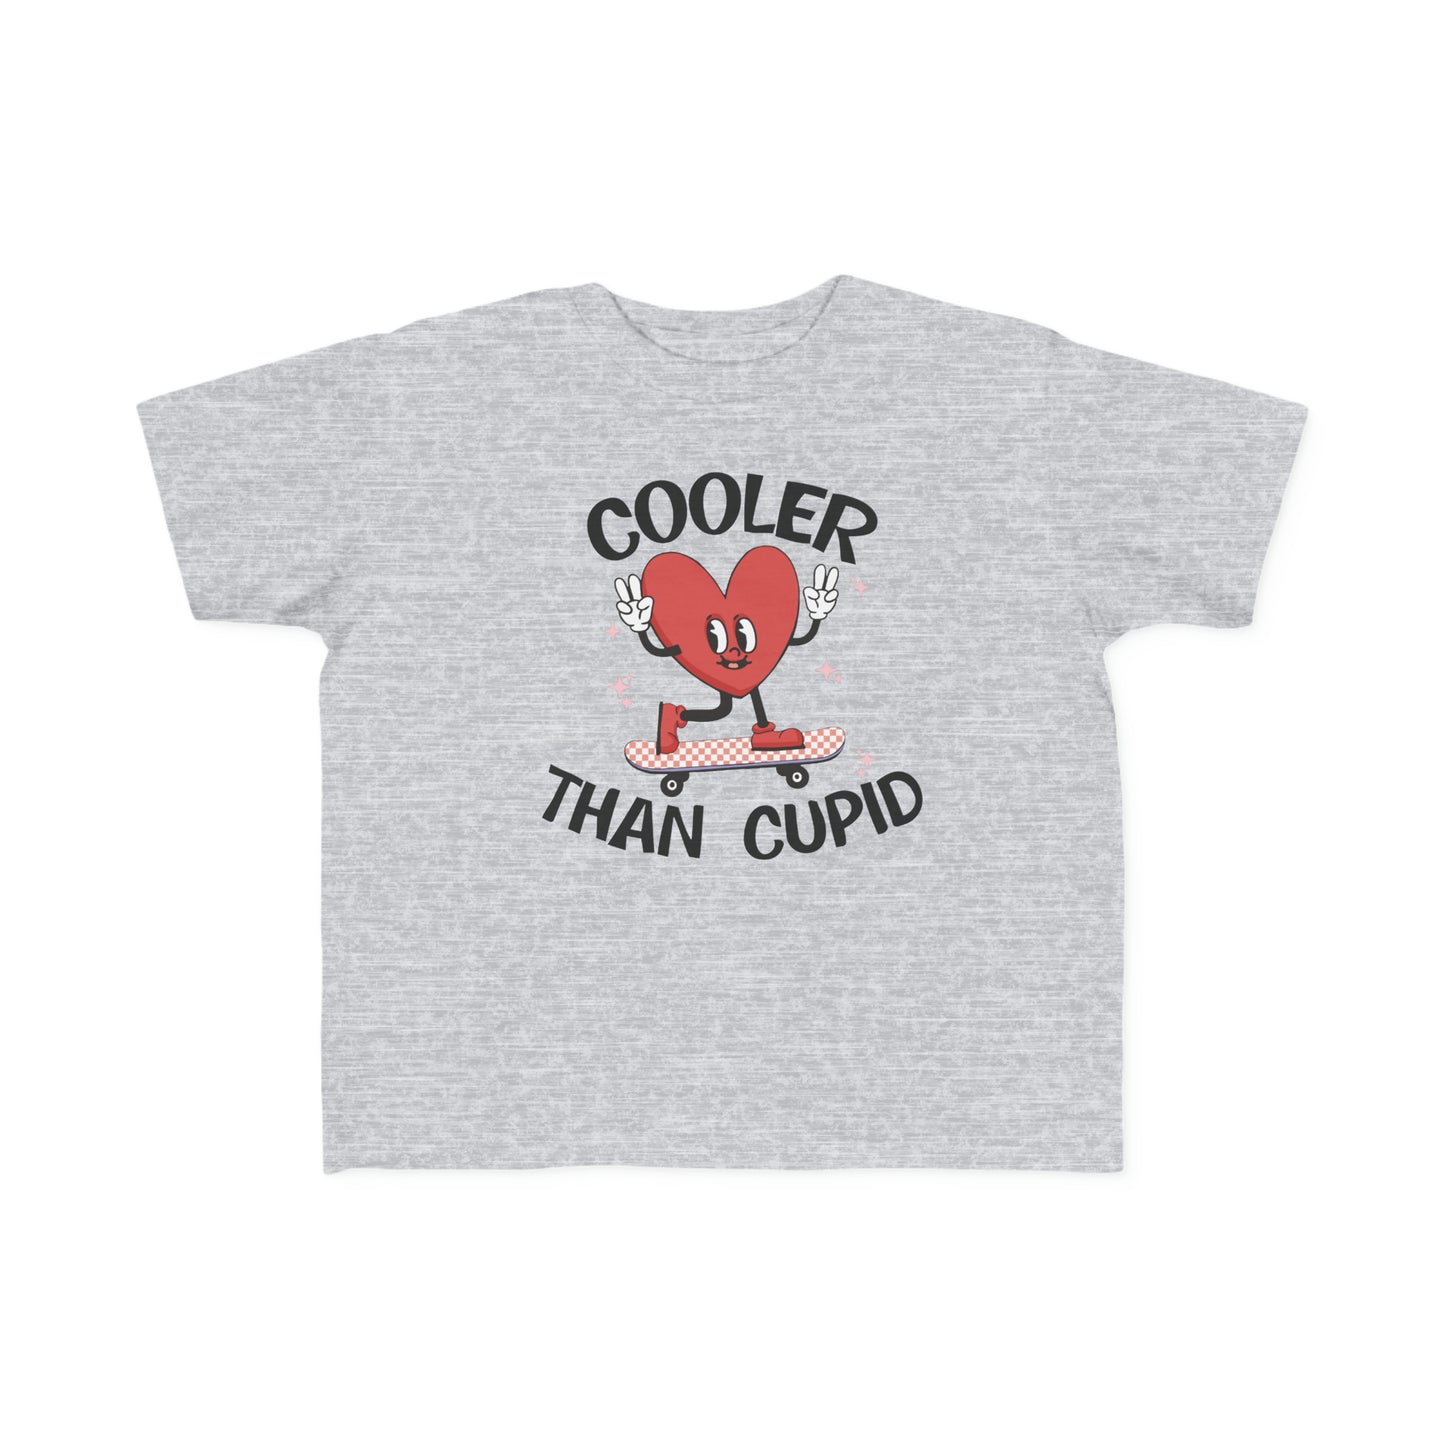 cooler than cupid Toddler's Fine Jersey Tee